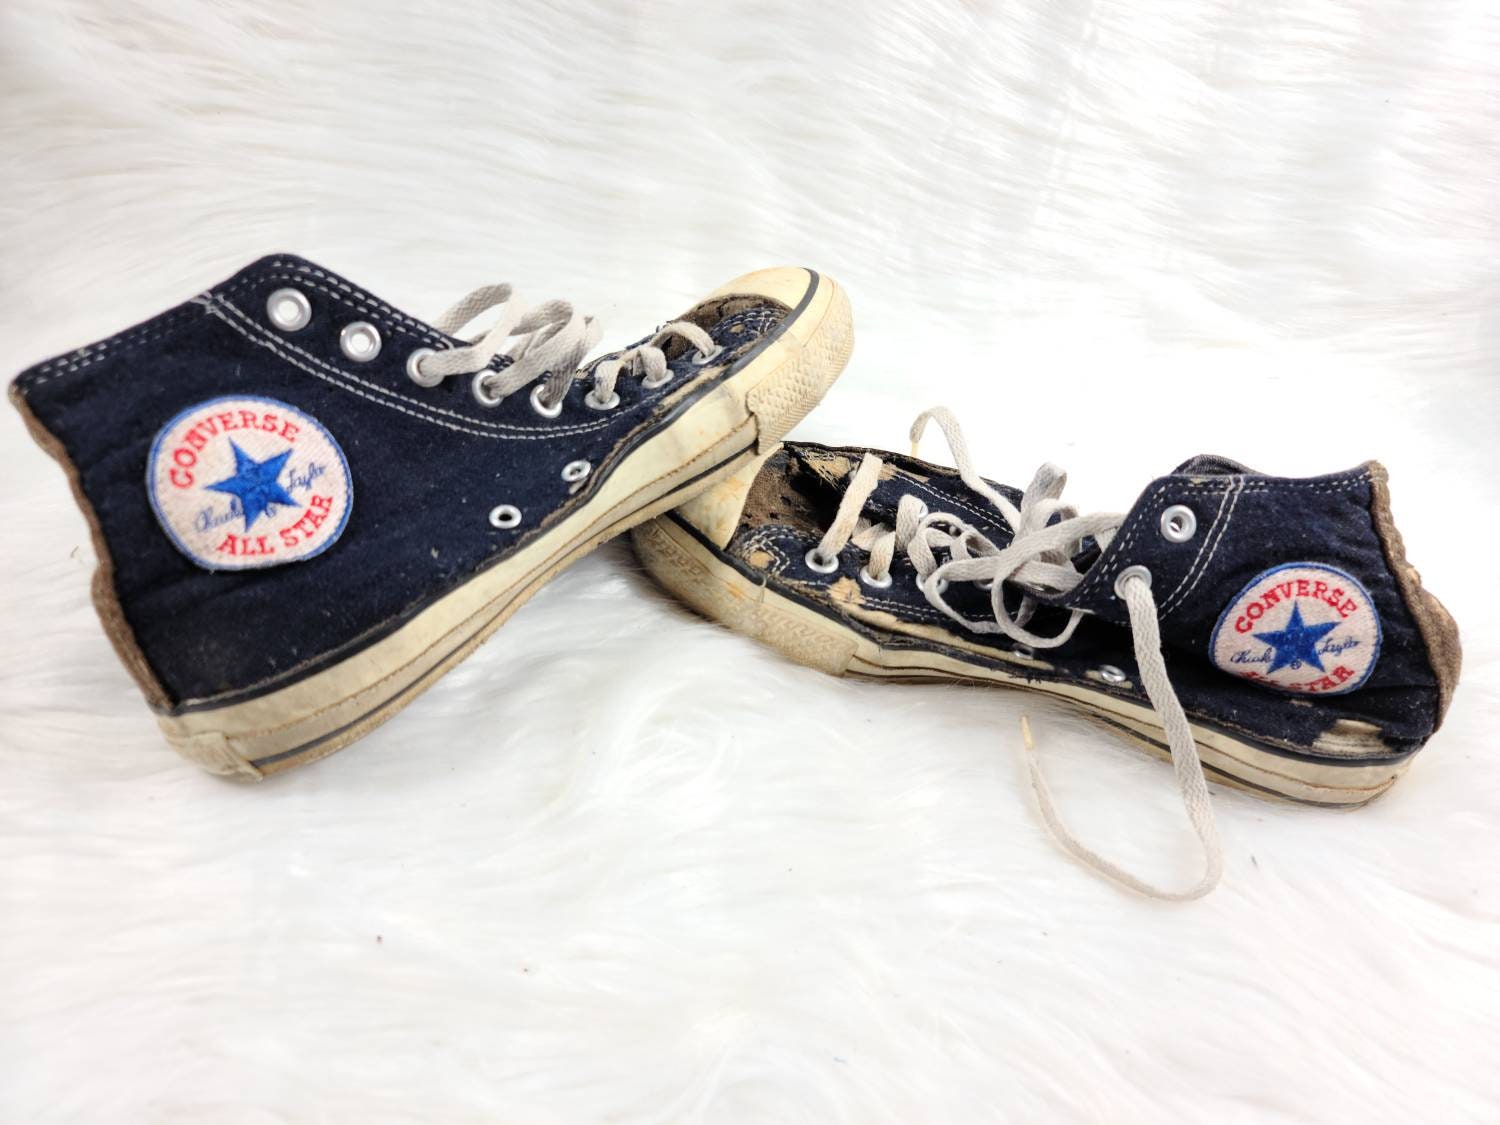 Used converse - Etsy